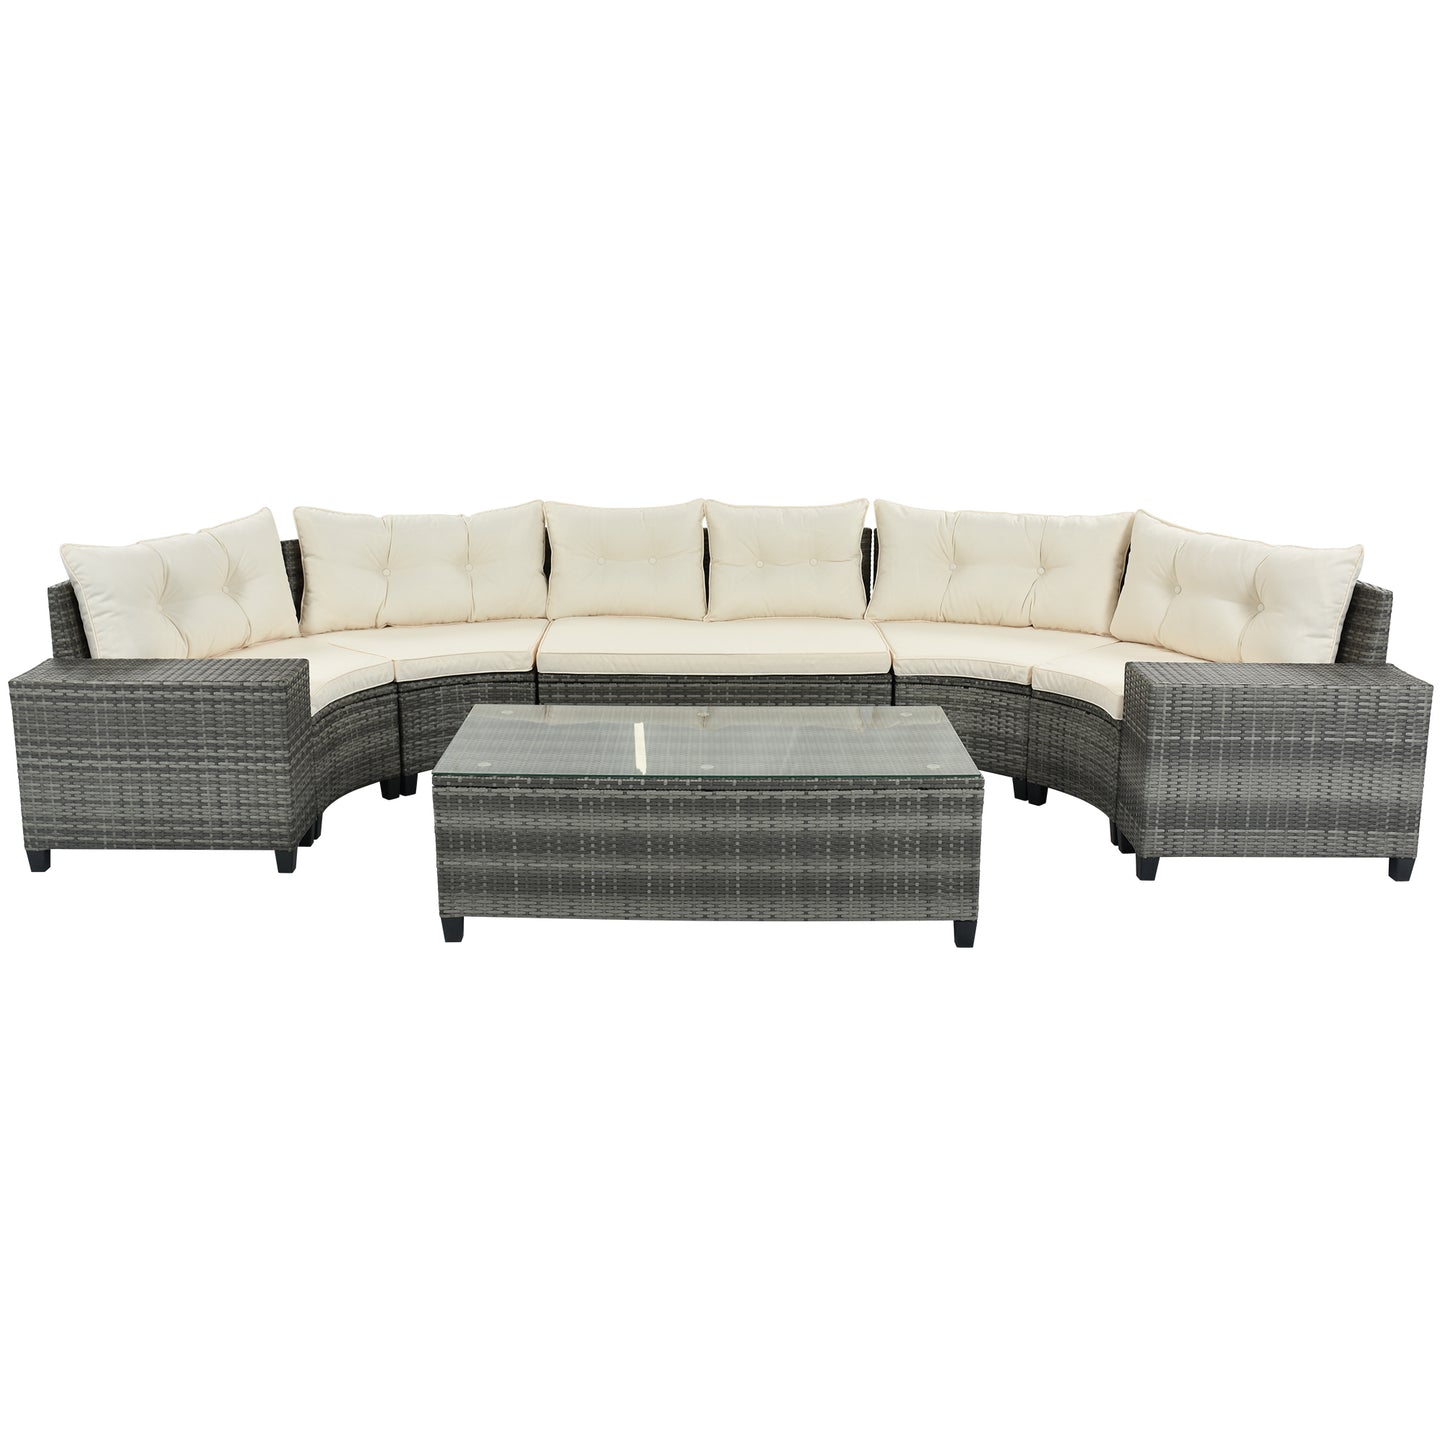 GO 8-pieces Outdoor Wicker Round Sofa Set, Half-Moon Sectional Sets All Weather, Curved Sofa Set With Rectangular Coffee Table, PE Rattan Water-resistant and UV Protected, Movable Cushion, Beige